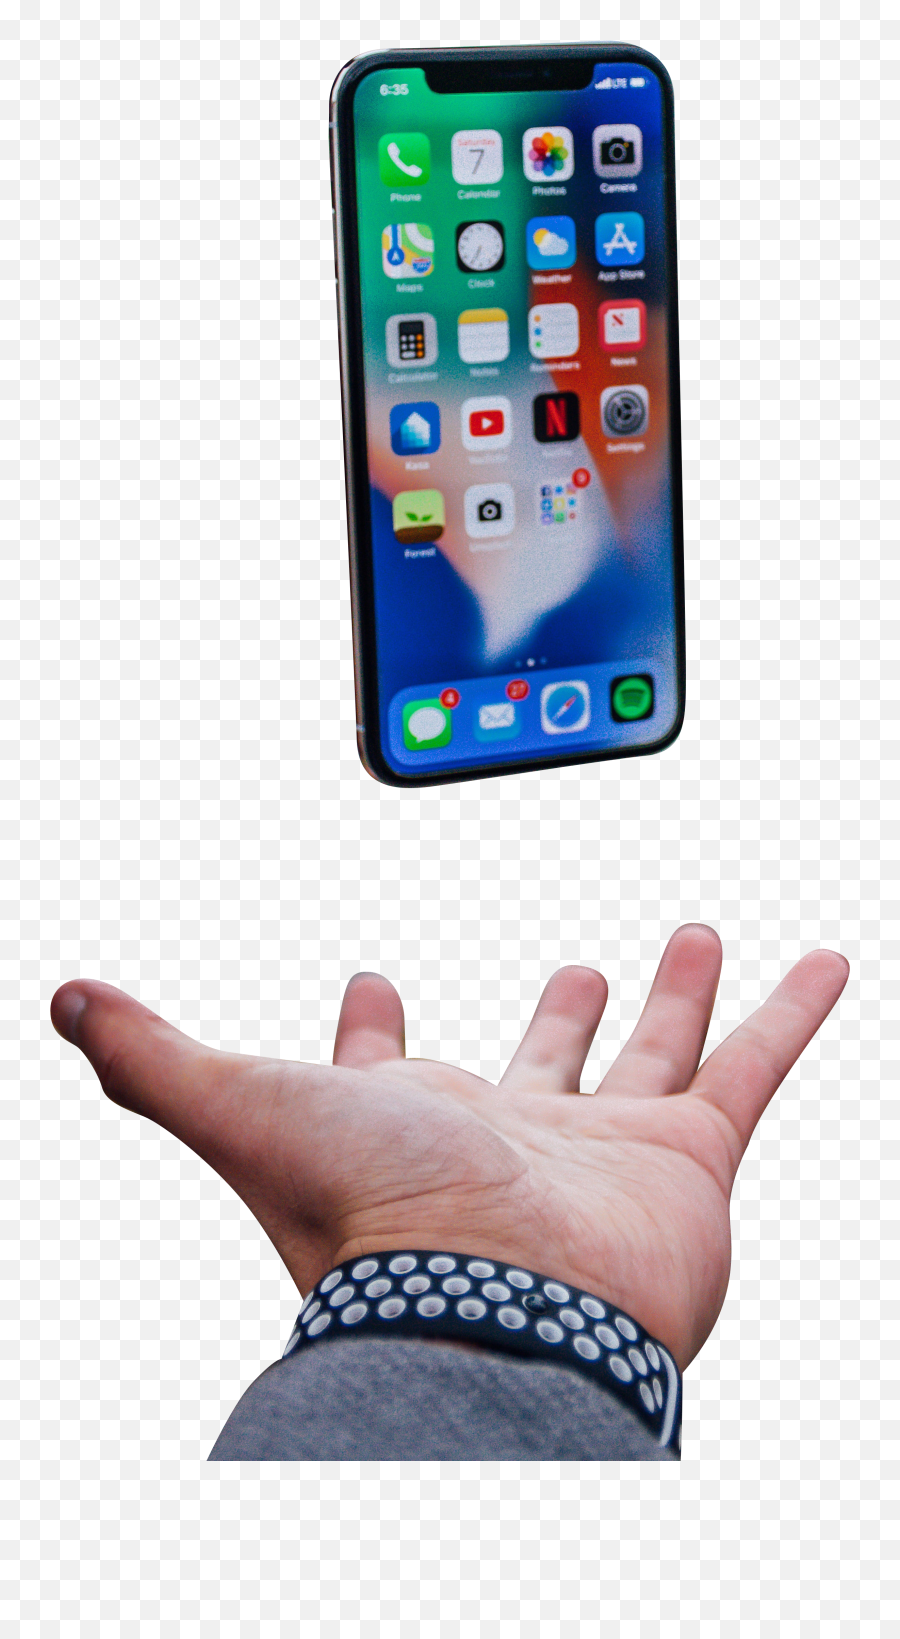 Iphone X Floating Over Palm Transparent Background Png - Phone Floating Over A Hand,Palm Png